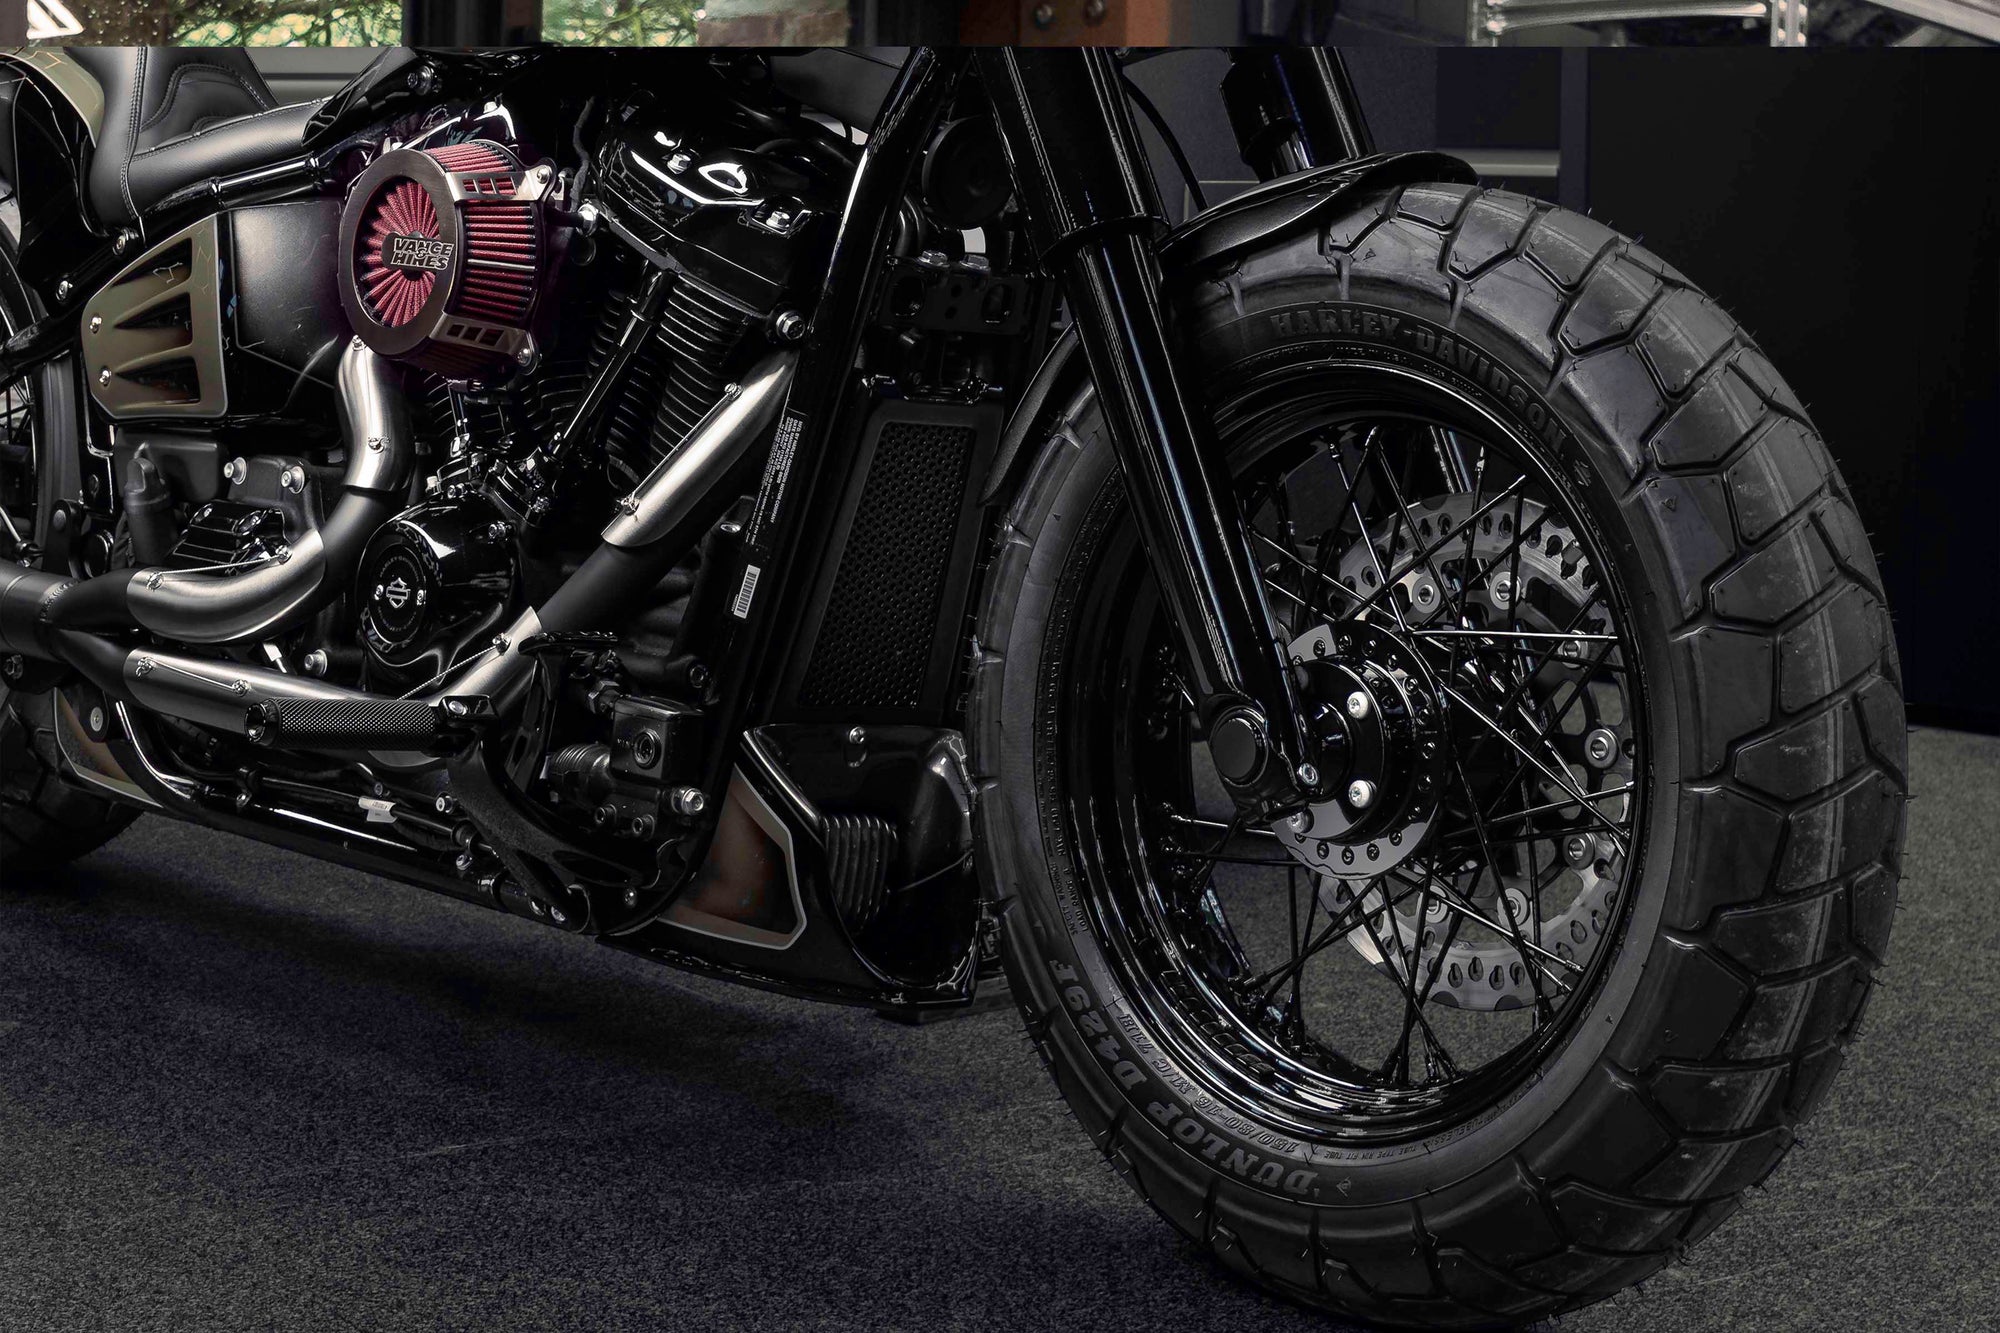 Zoomed Harley Davidson motorcycle with Killer Custom parts from the front in a modern bike shop